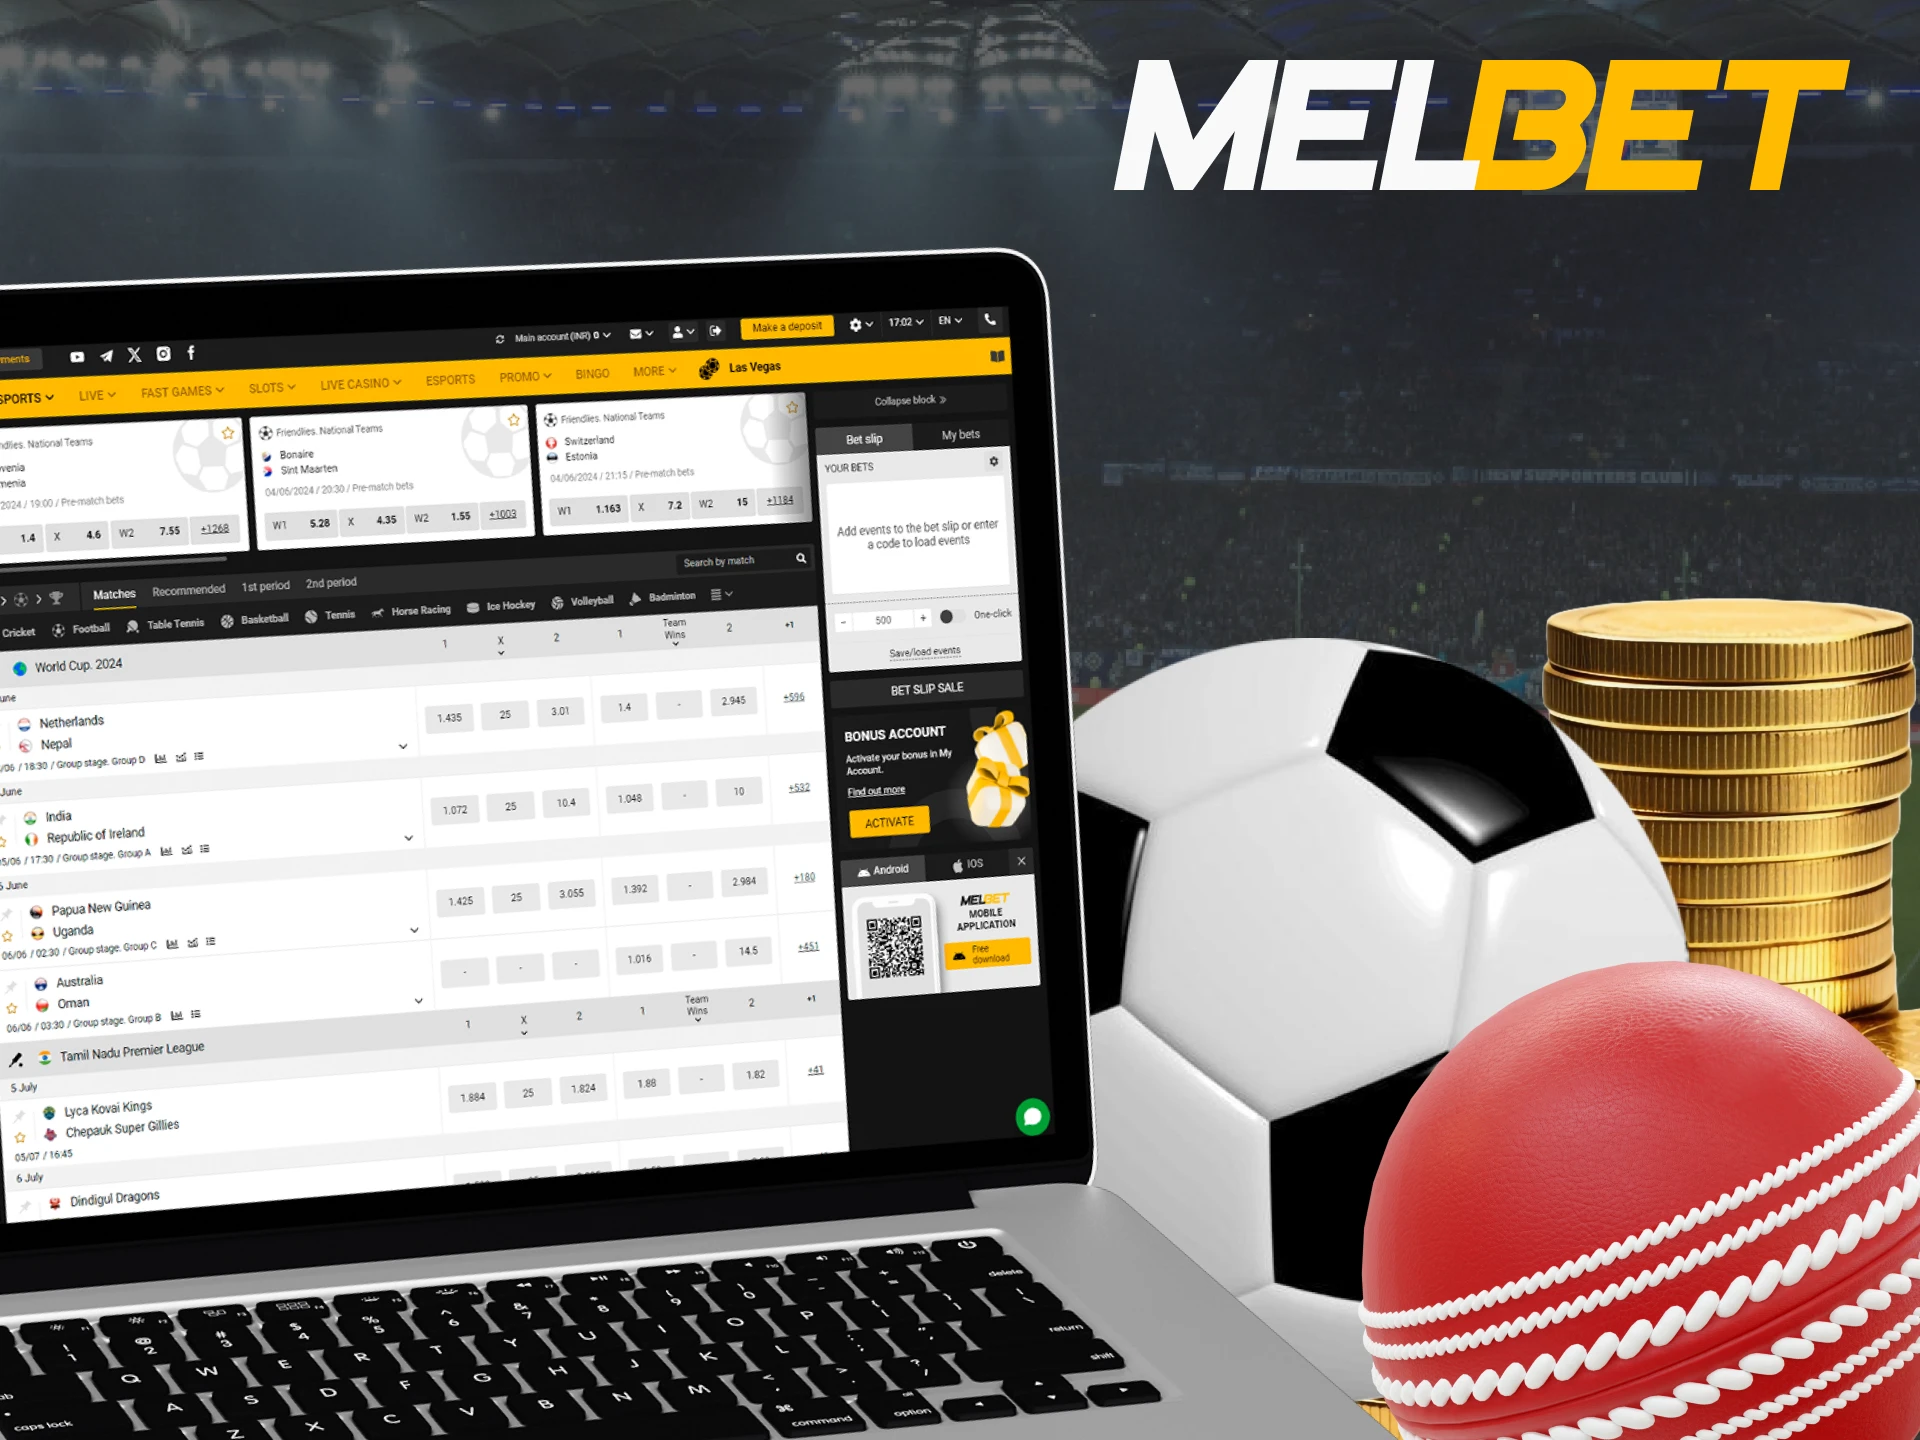 At Melbet you can bet on your favorite sports after registering.